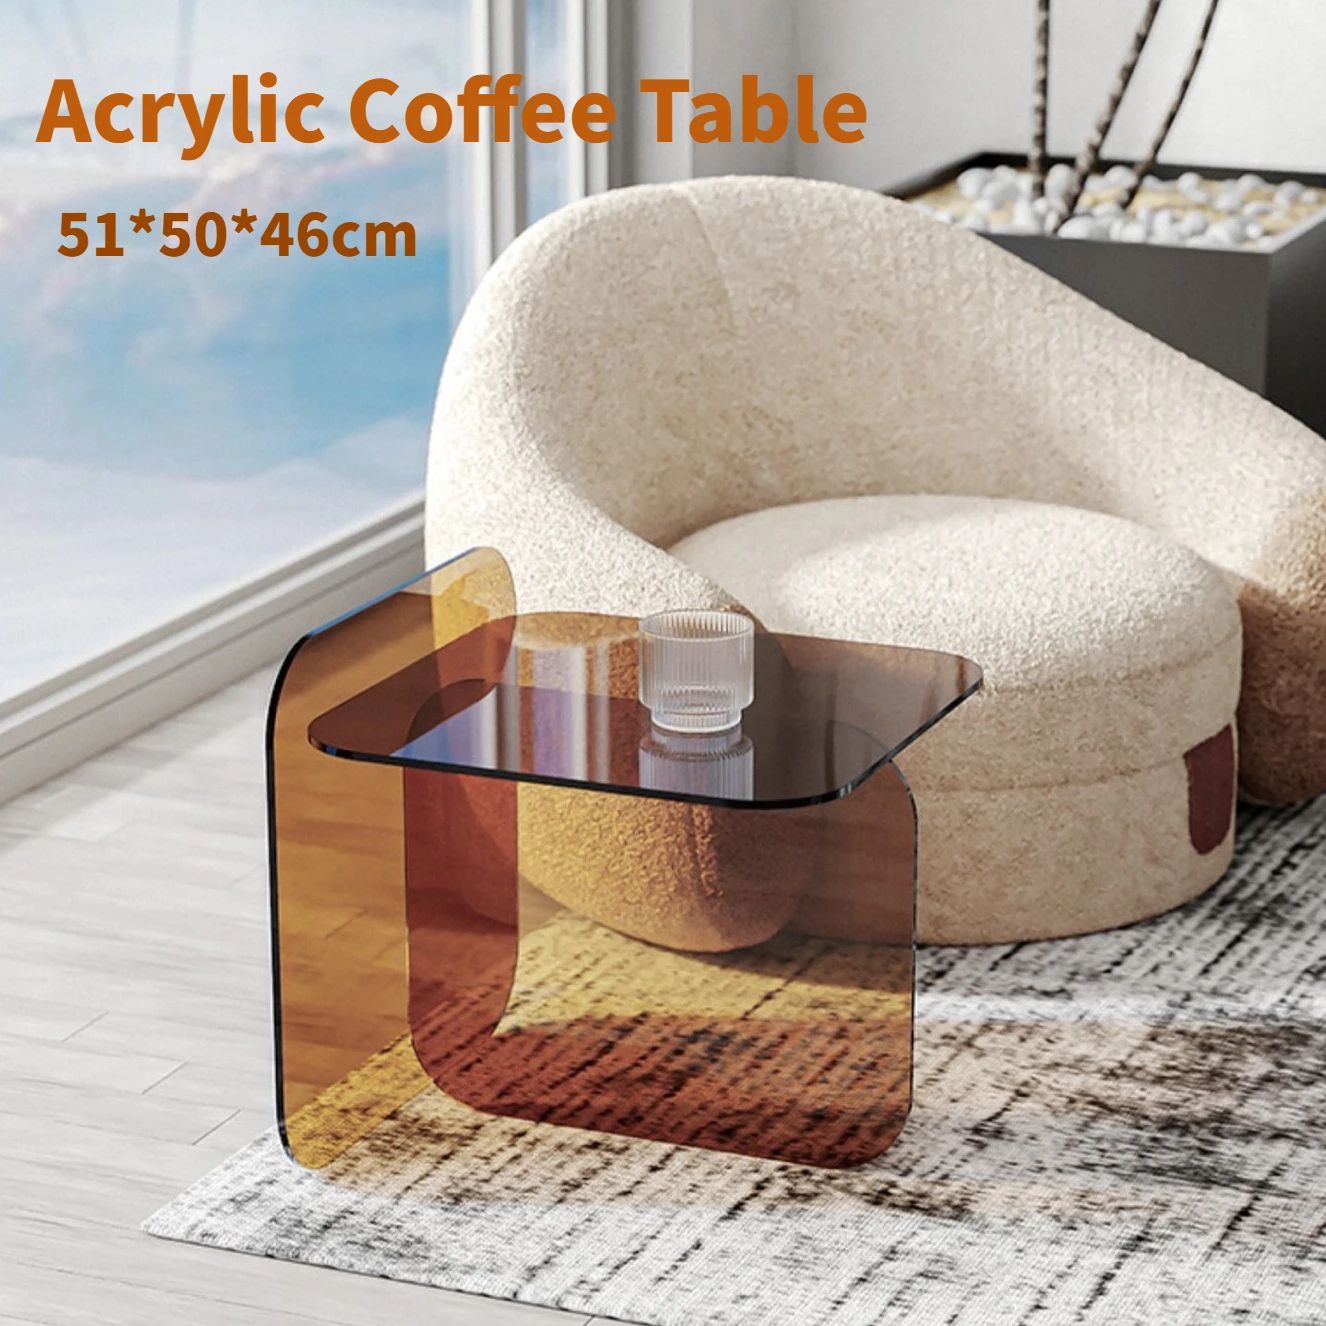 Acrylic Transparent Side Table Living Room Coffee Table With Magazine Rack  Bedroom Bedside Table Bed Reading Tables Room Decor With Transparent Side Tables For Living Rooms (View 6 of 15)